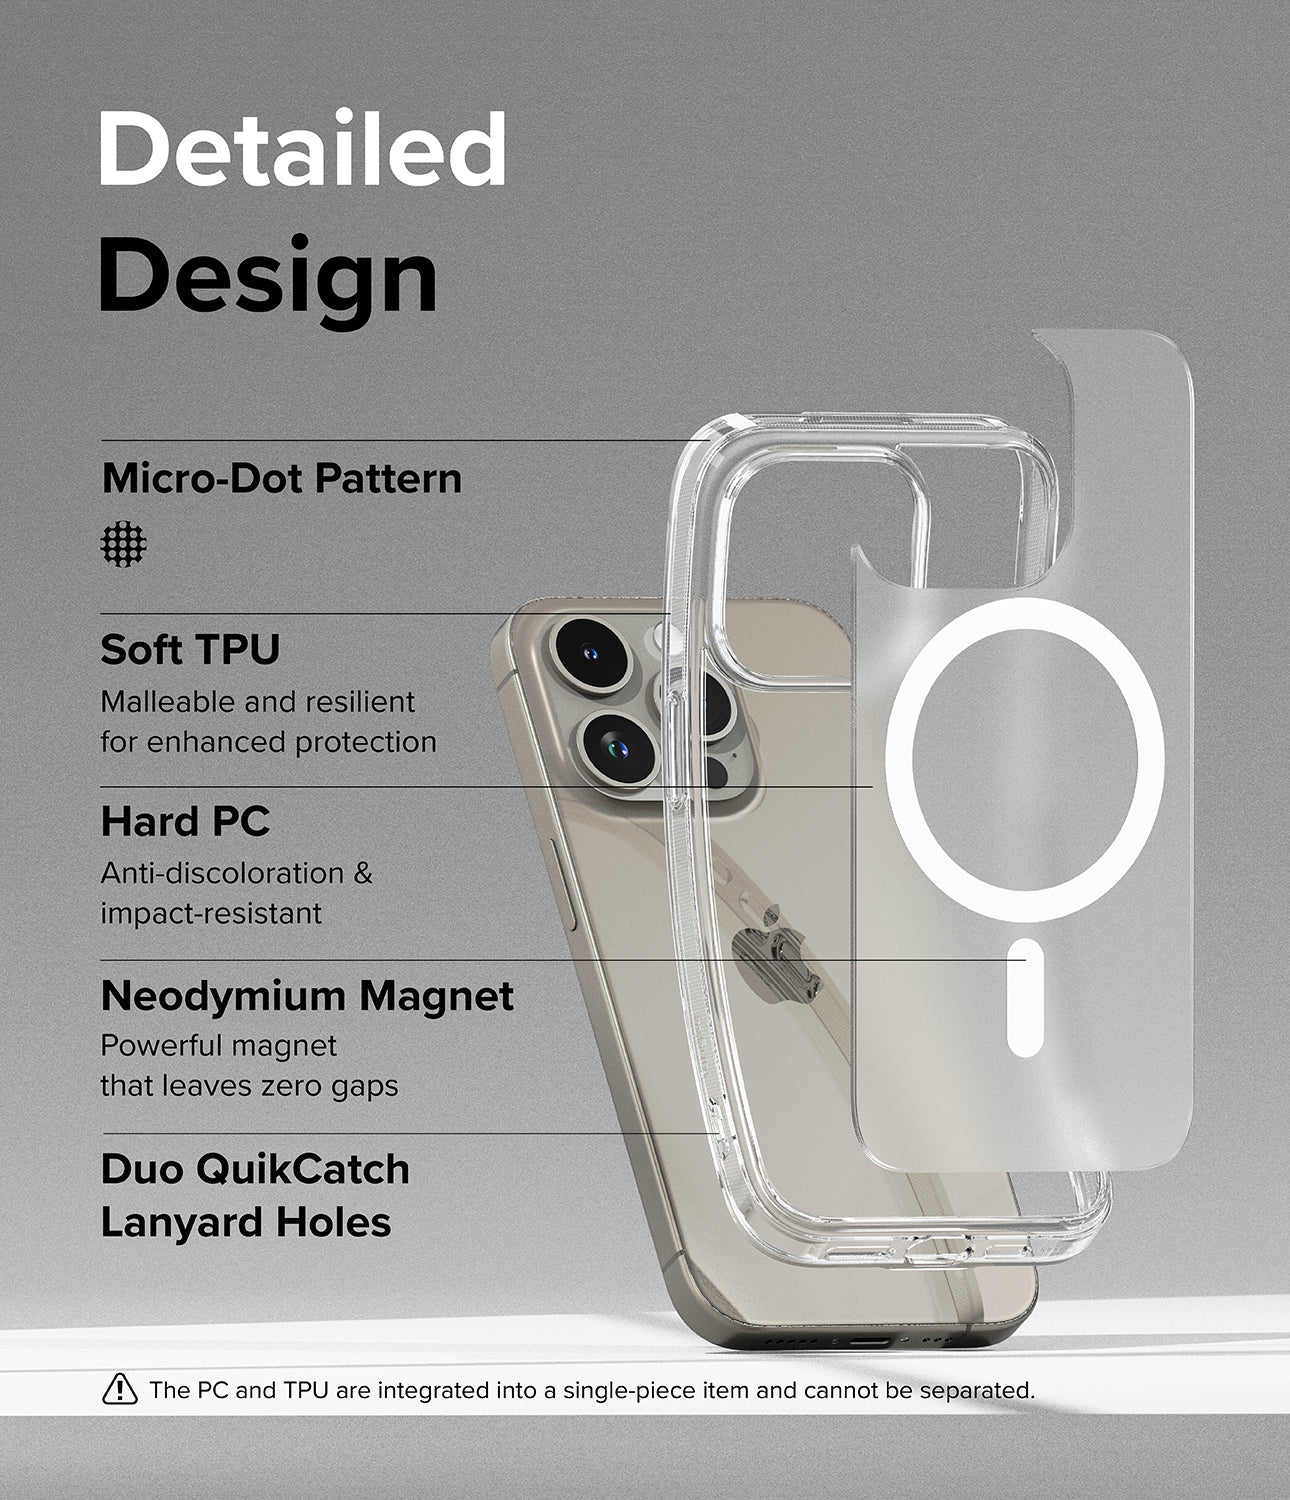 iPhone 15 Pro Case | Fusion Magnetic - Matte Clear - Detailed Design. Micro-Dot Pattern. Malleable and resilient for enhanced protection with Soft TPU. Anti-discoloration and impact-resistant with Hard PC. Neodymium Magnet for powerful magnet that leaves zero gaps. Duo QuikCatch Lanyard Holes.